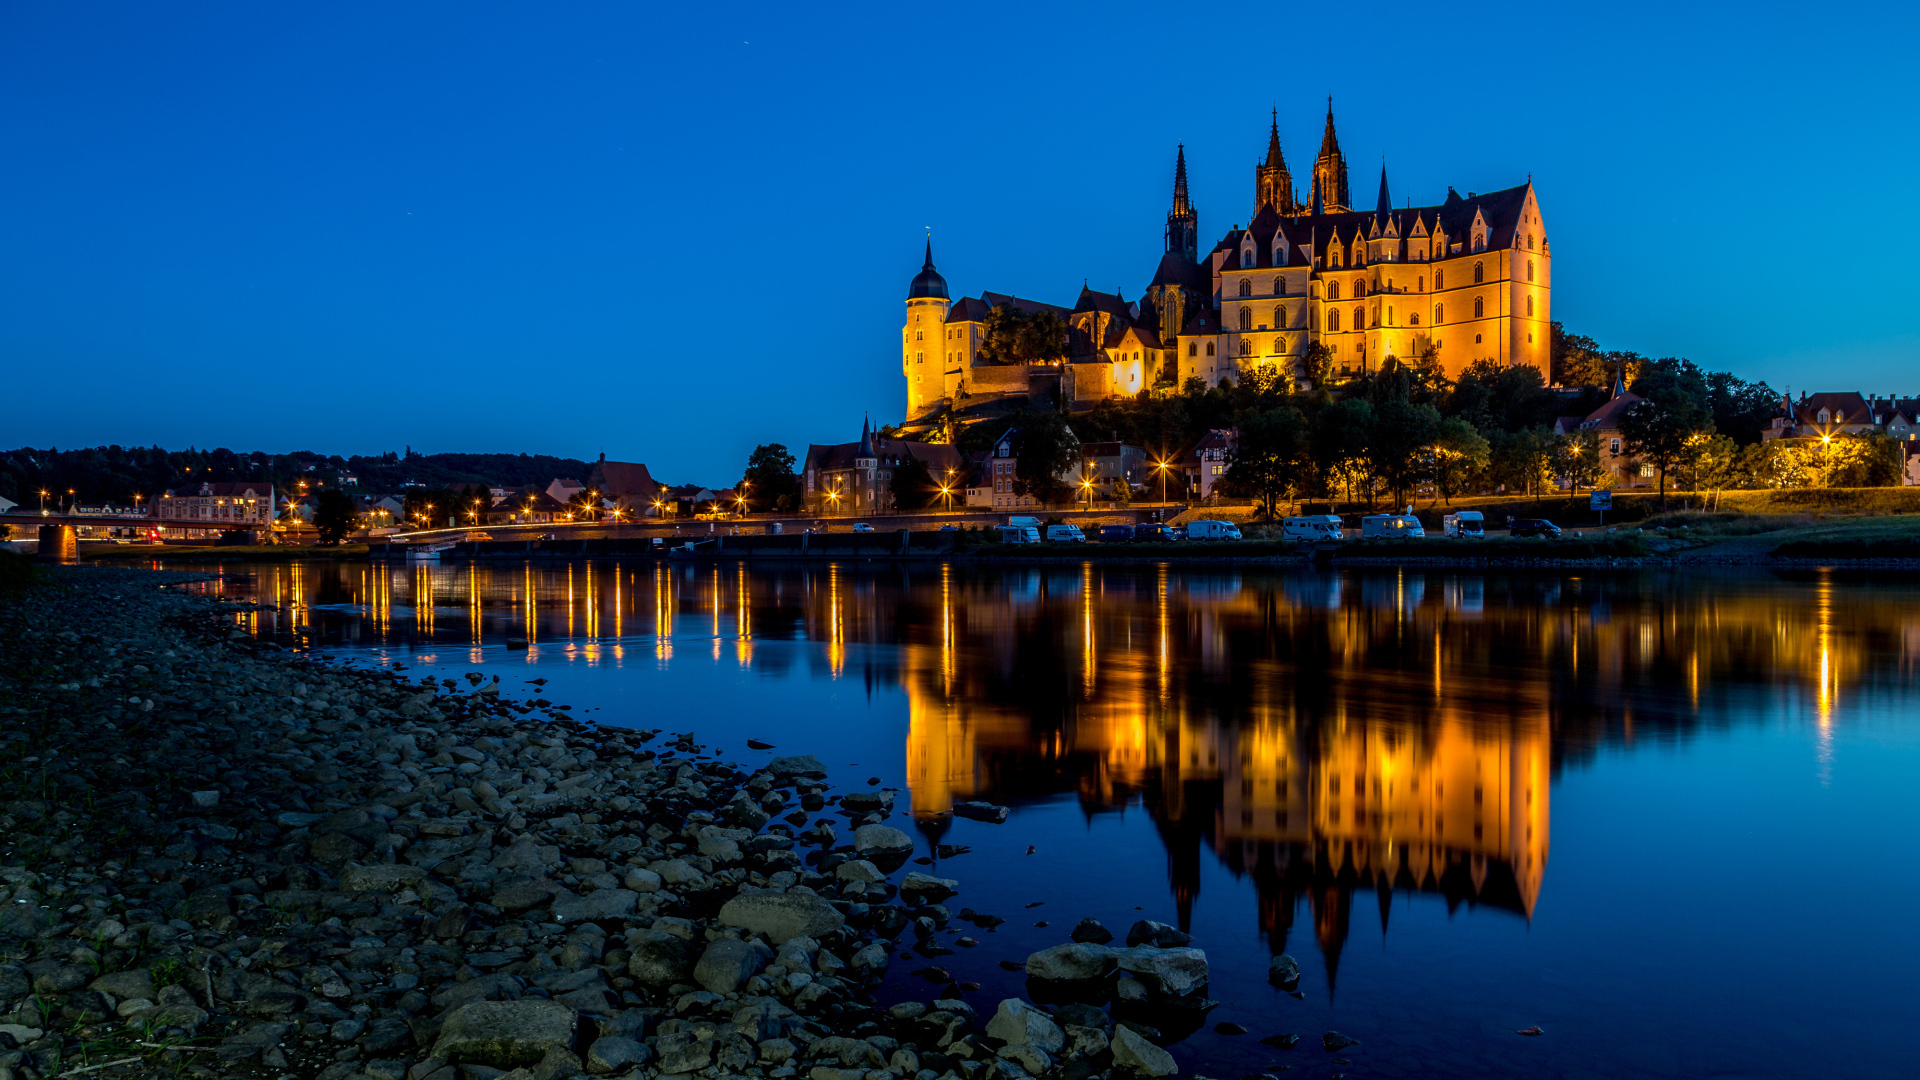 Evening lights of the castle of Albrechtsburg are reflected in the water, the city of Meissen, Germany